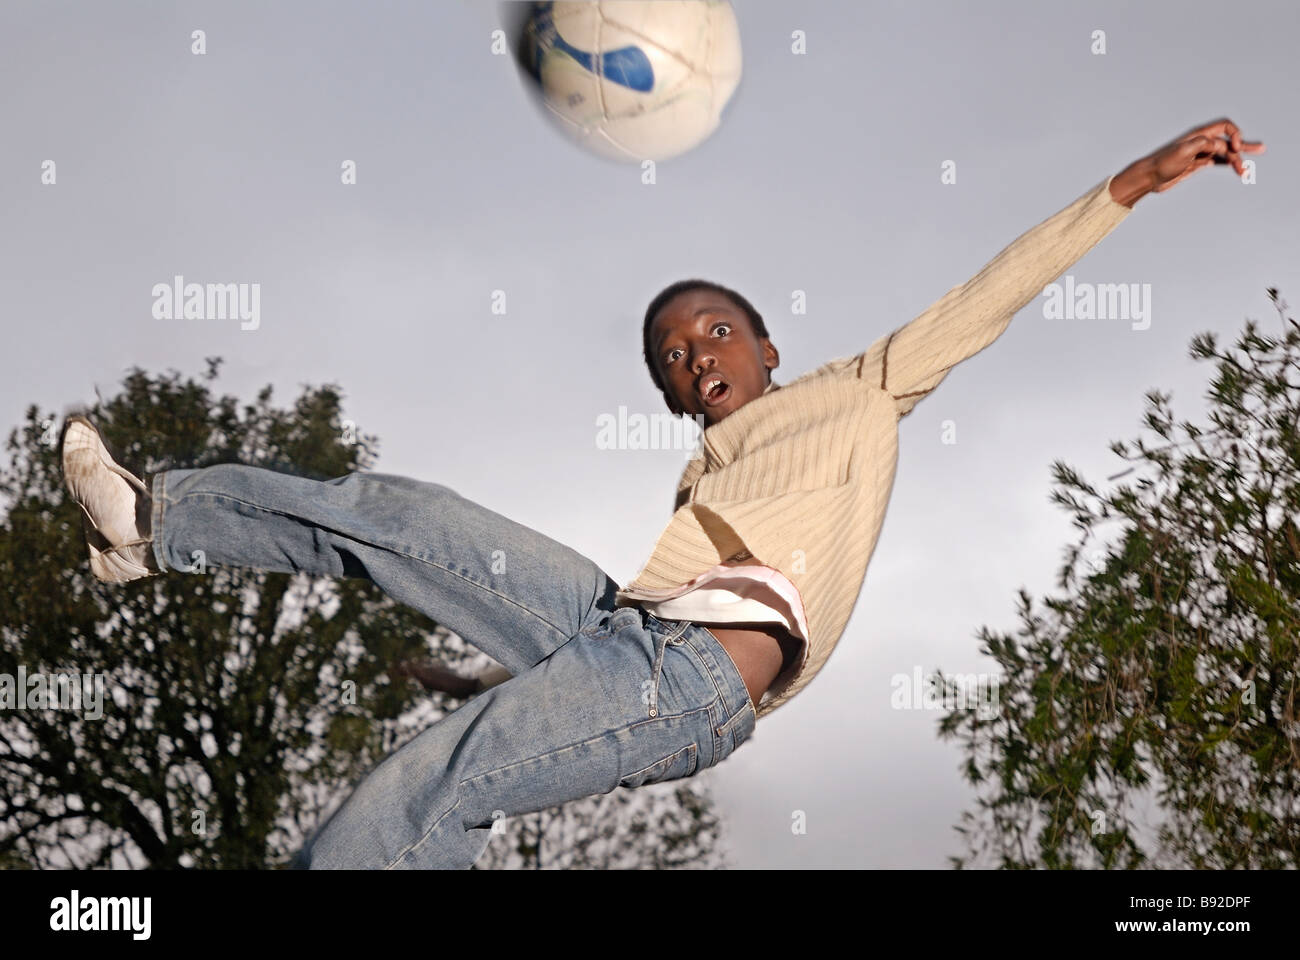 Young boy leaping for soccer ball Cape Town Rosebank Western Cape Province South Africa Stock Photo